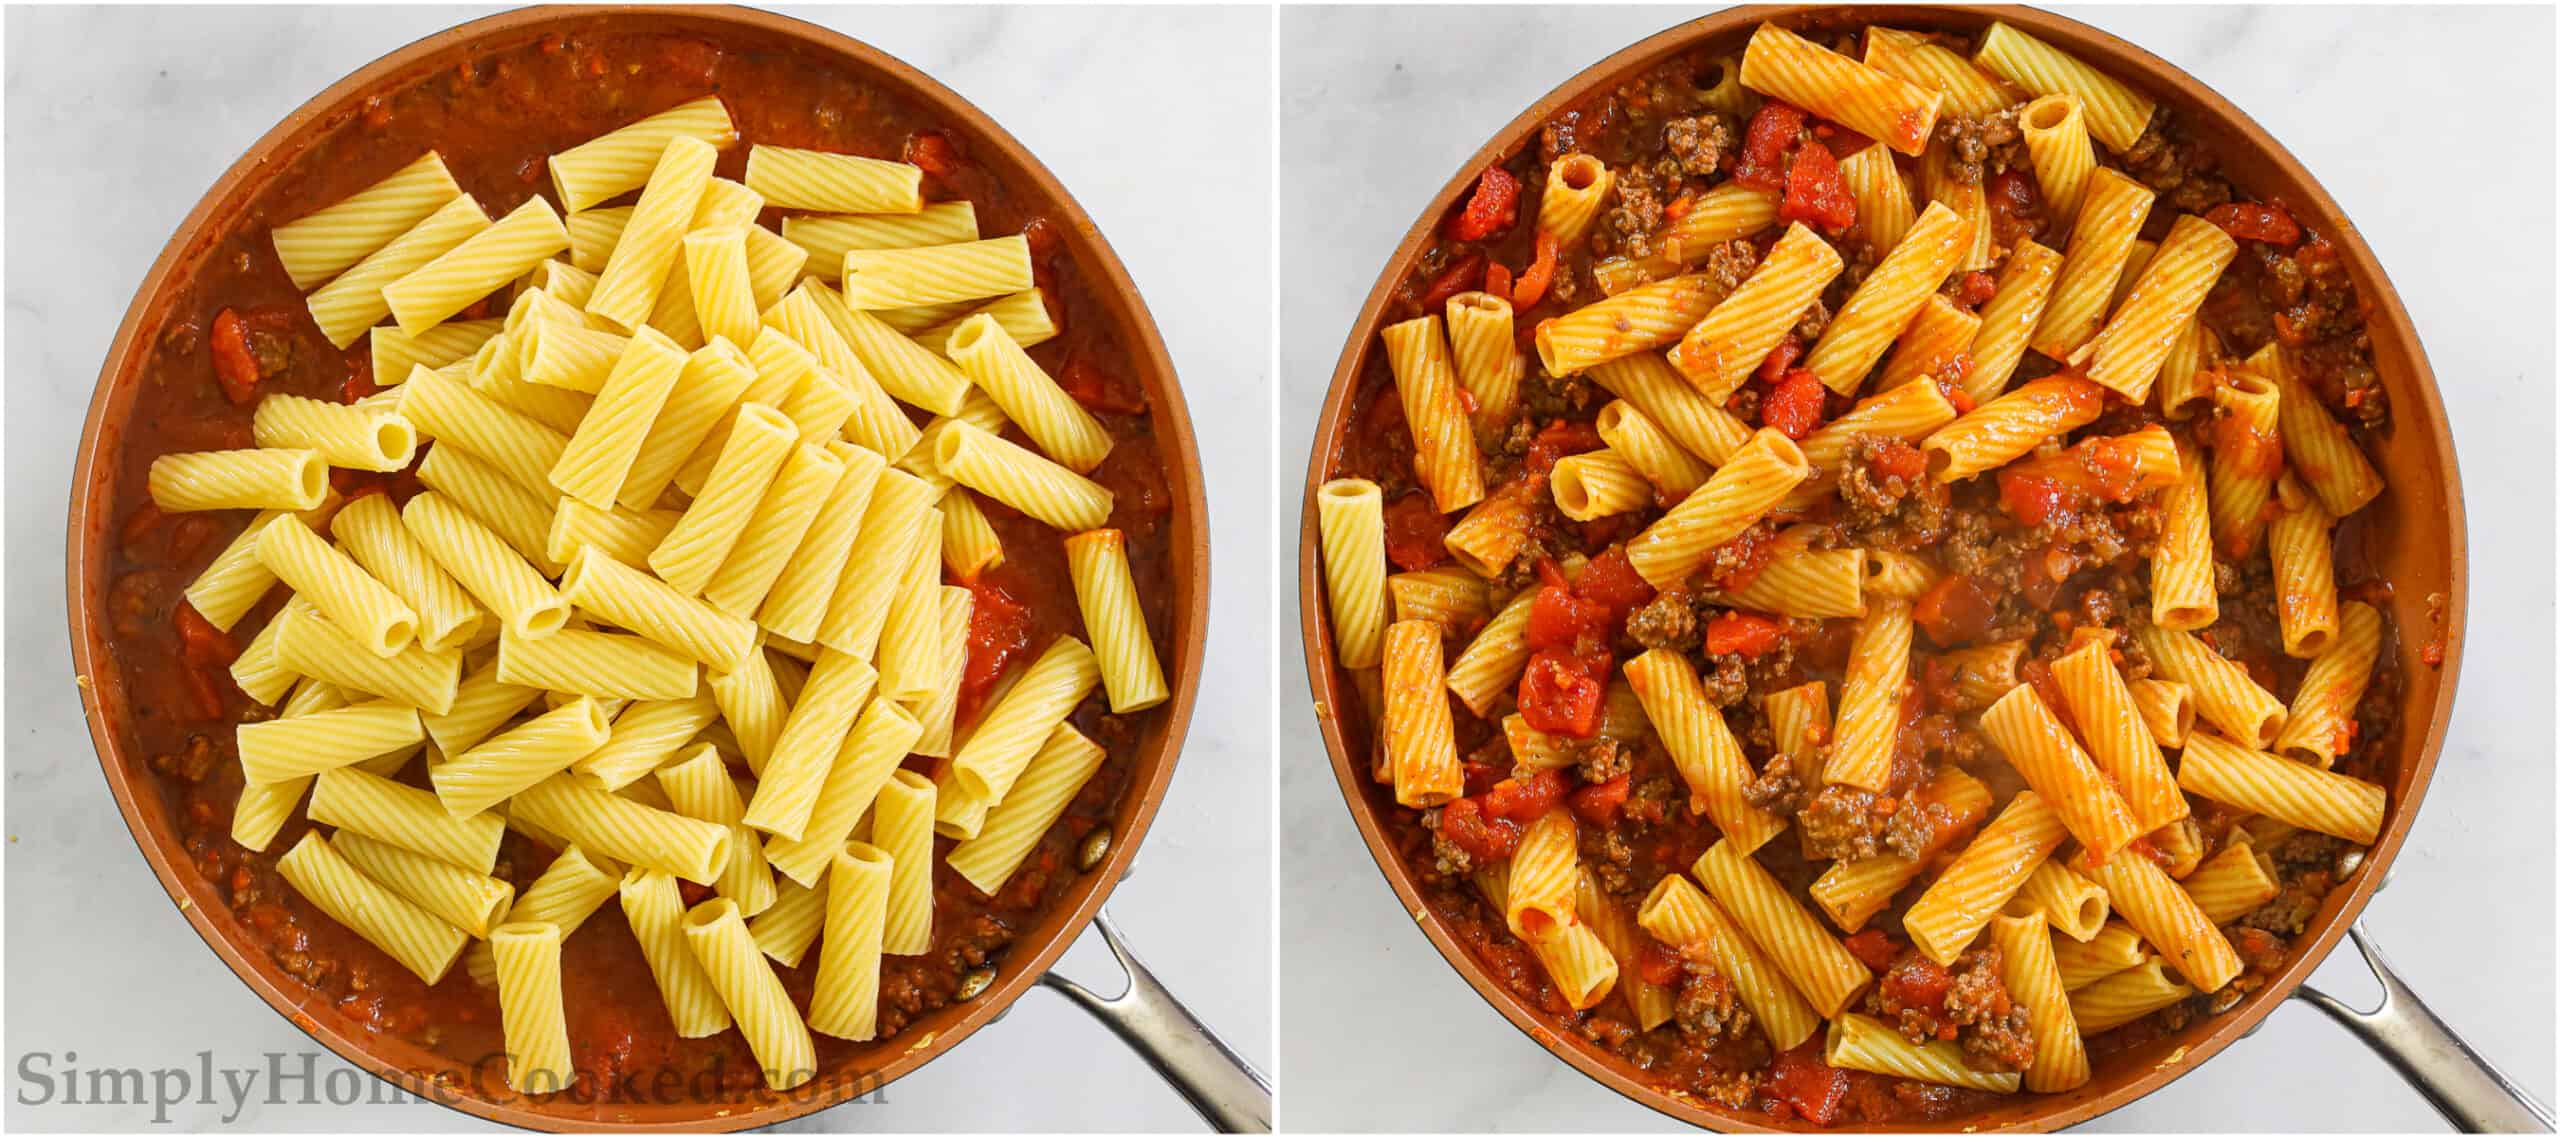 Steps to make Rigatoni Bolognese, including mixing the meat sauce with the pasta and sprinkling it with Parmesan cheese.